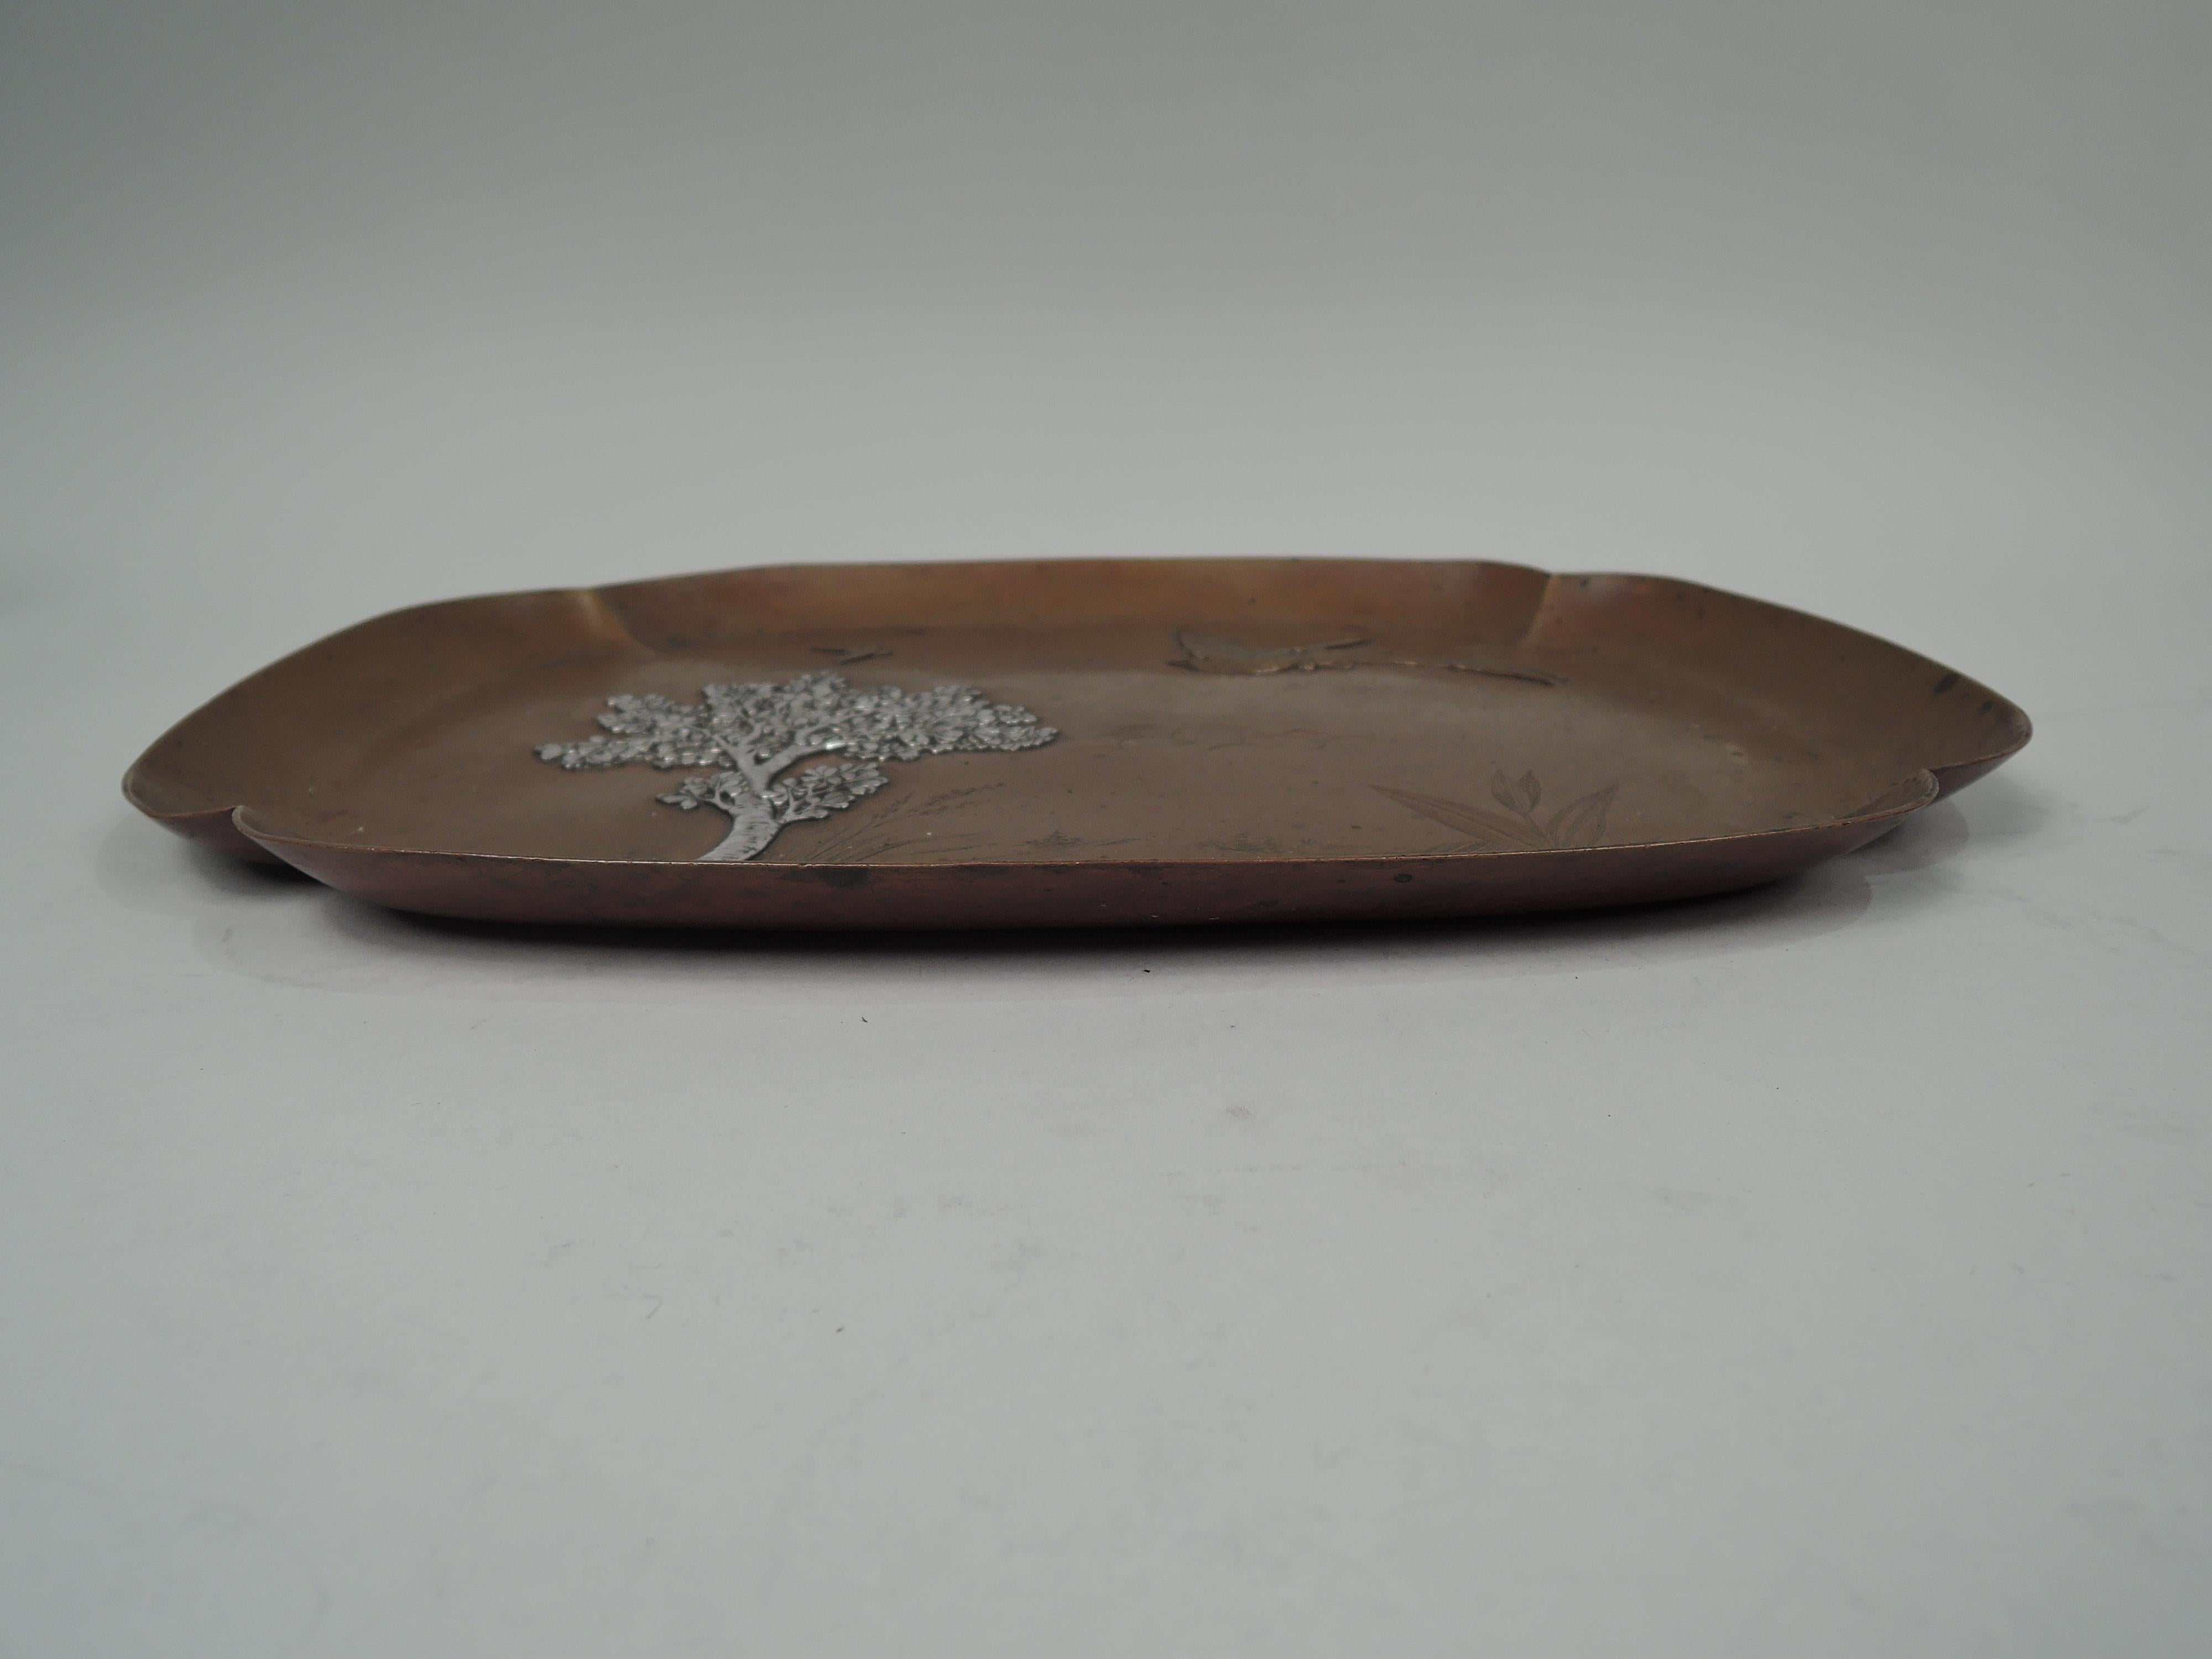 Japonesque mixed metal copper tray. Made by Gorham in Providence in 1882. Lobed and rectangular with curved sides. Applied copper and silver ornament: Tree with blossoming branches and sinuous irregular trunk rooted in granulated soil; above a